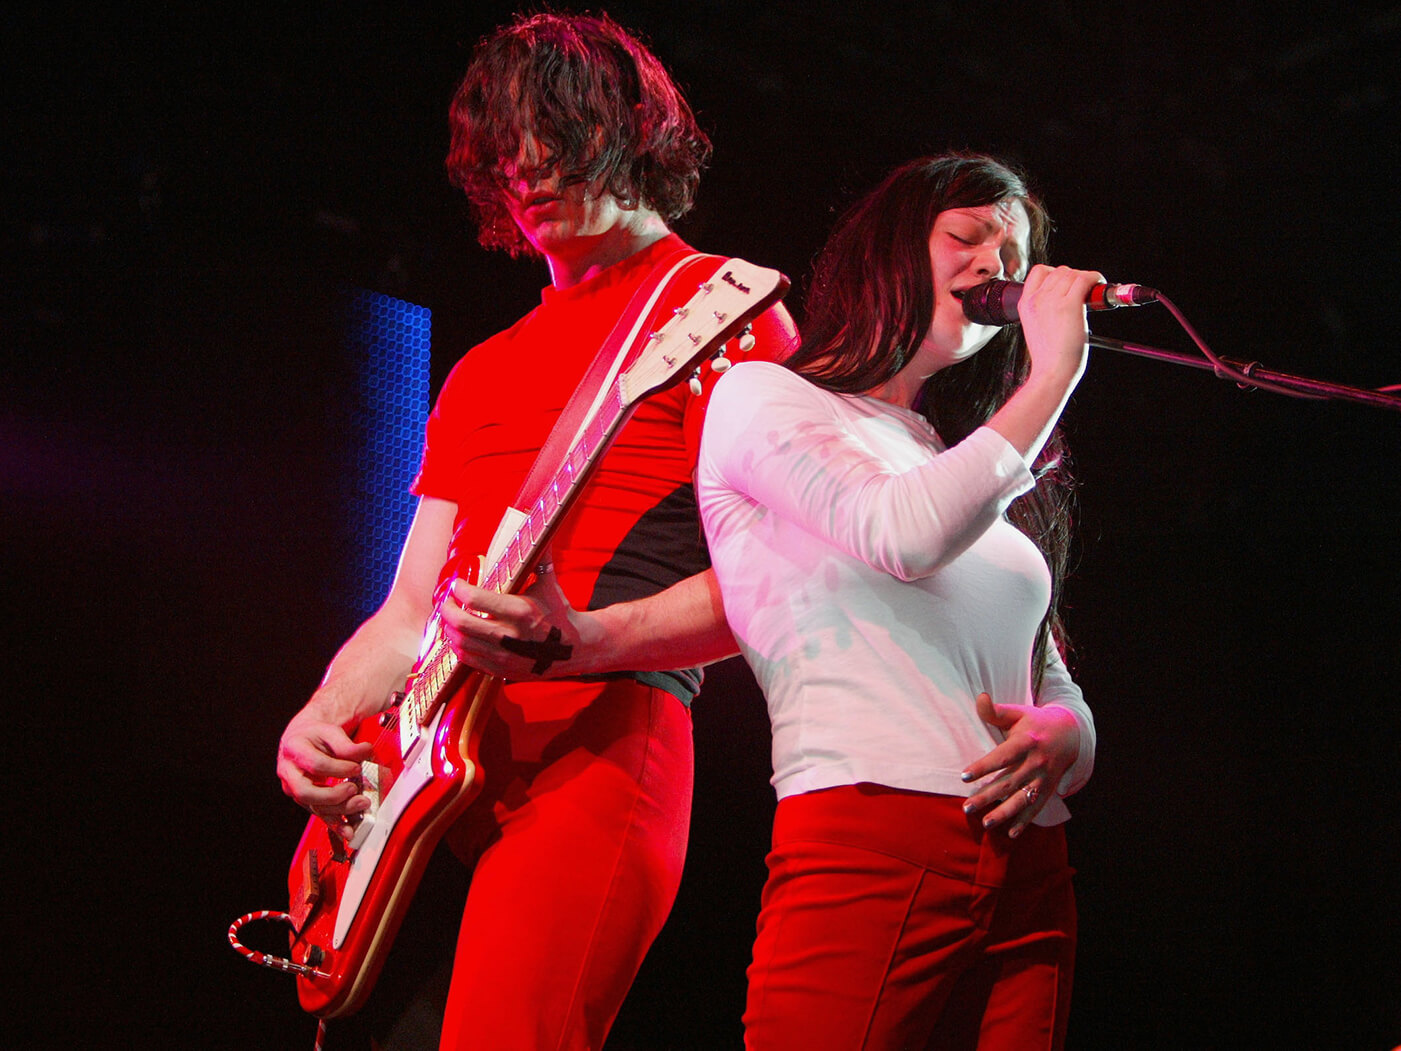 Jack and Meg White of The White Stripes performing in 2003 by Jon Super/Redferns via Getty Images